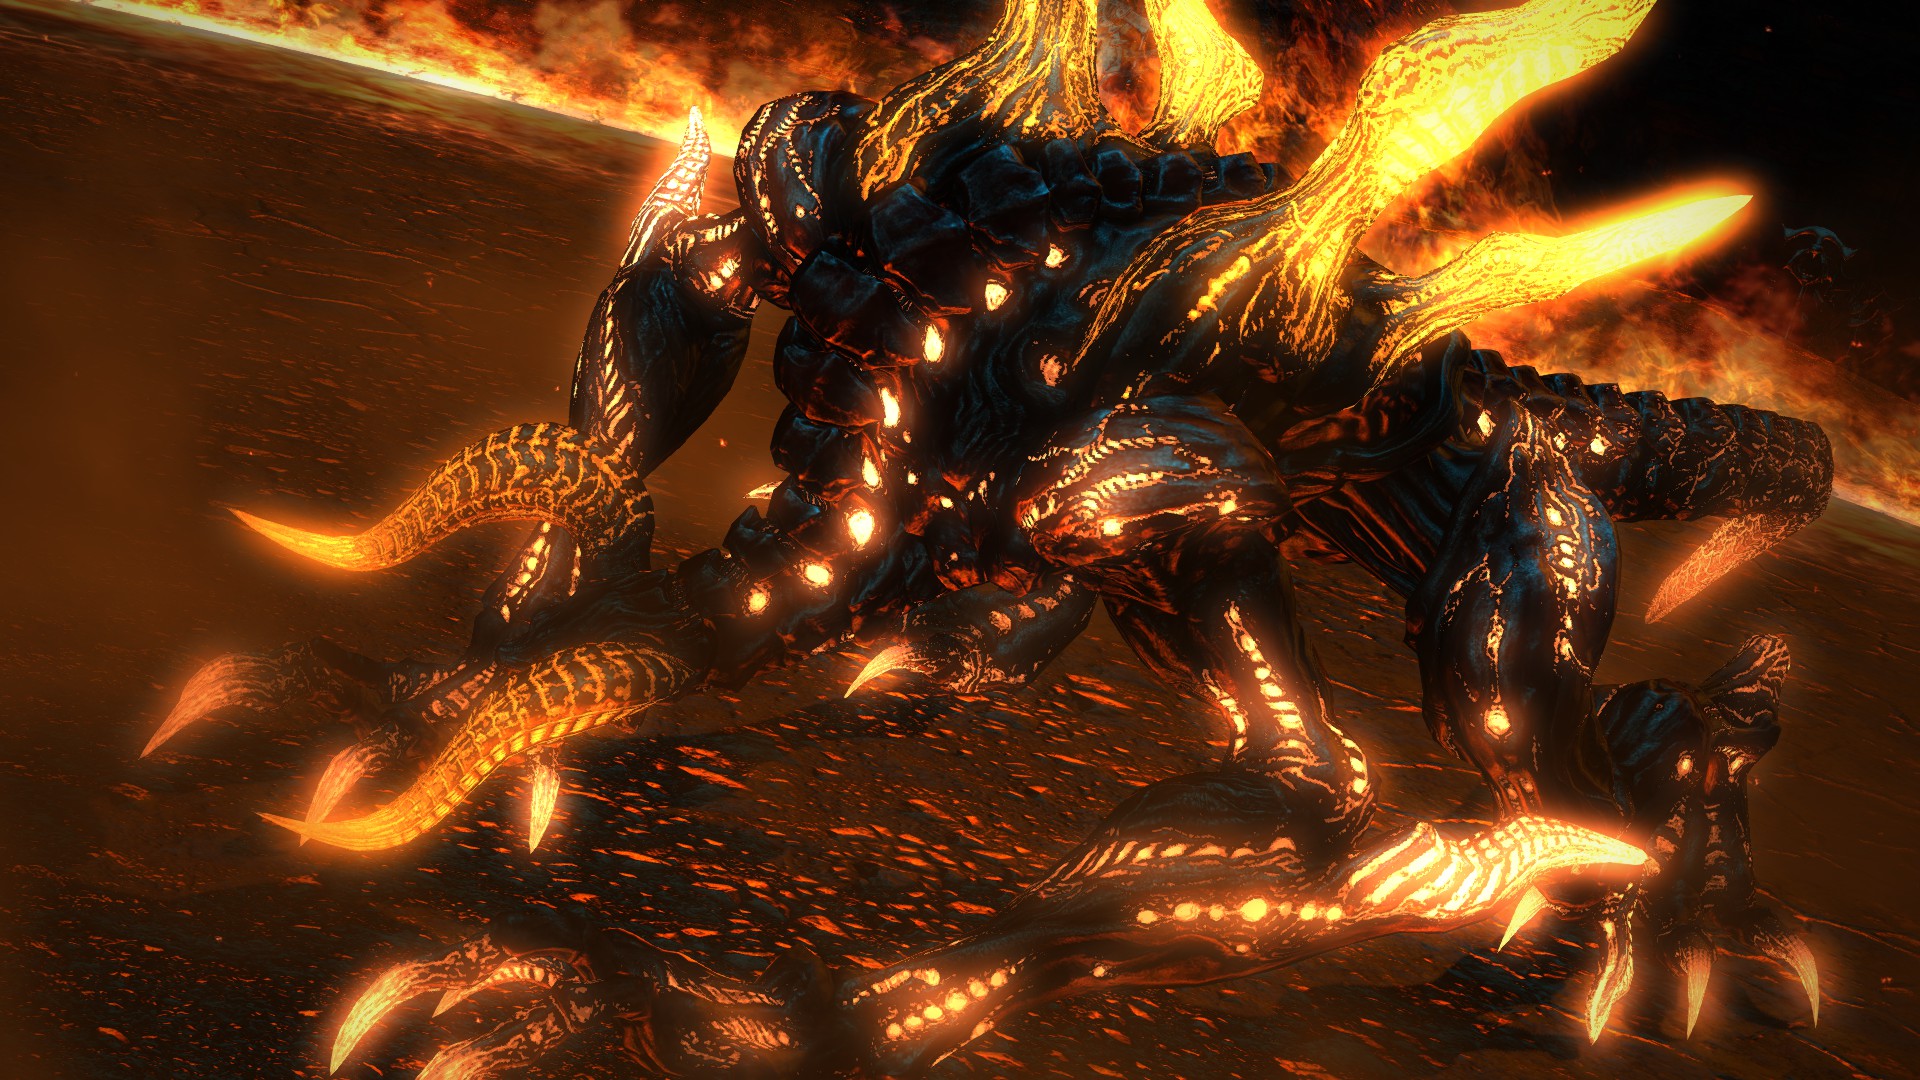 [Primal Boss Guide] Taking on Ifrit in FFXIV